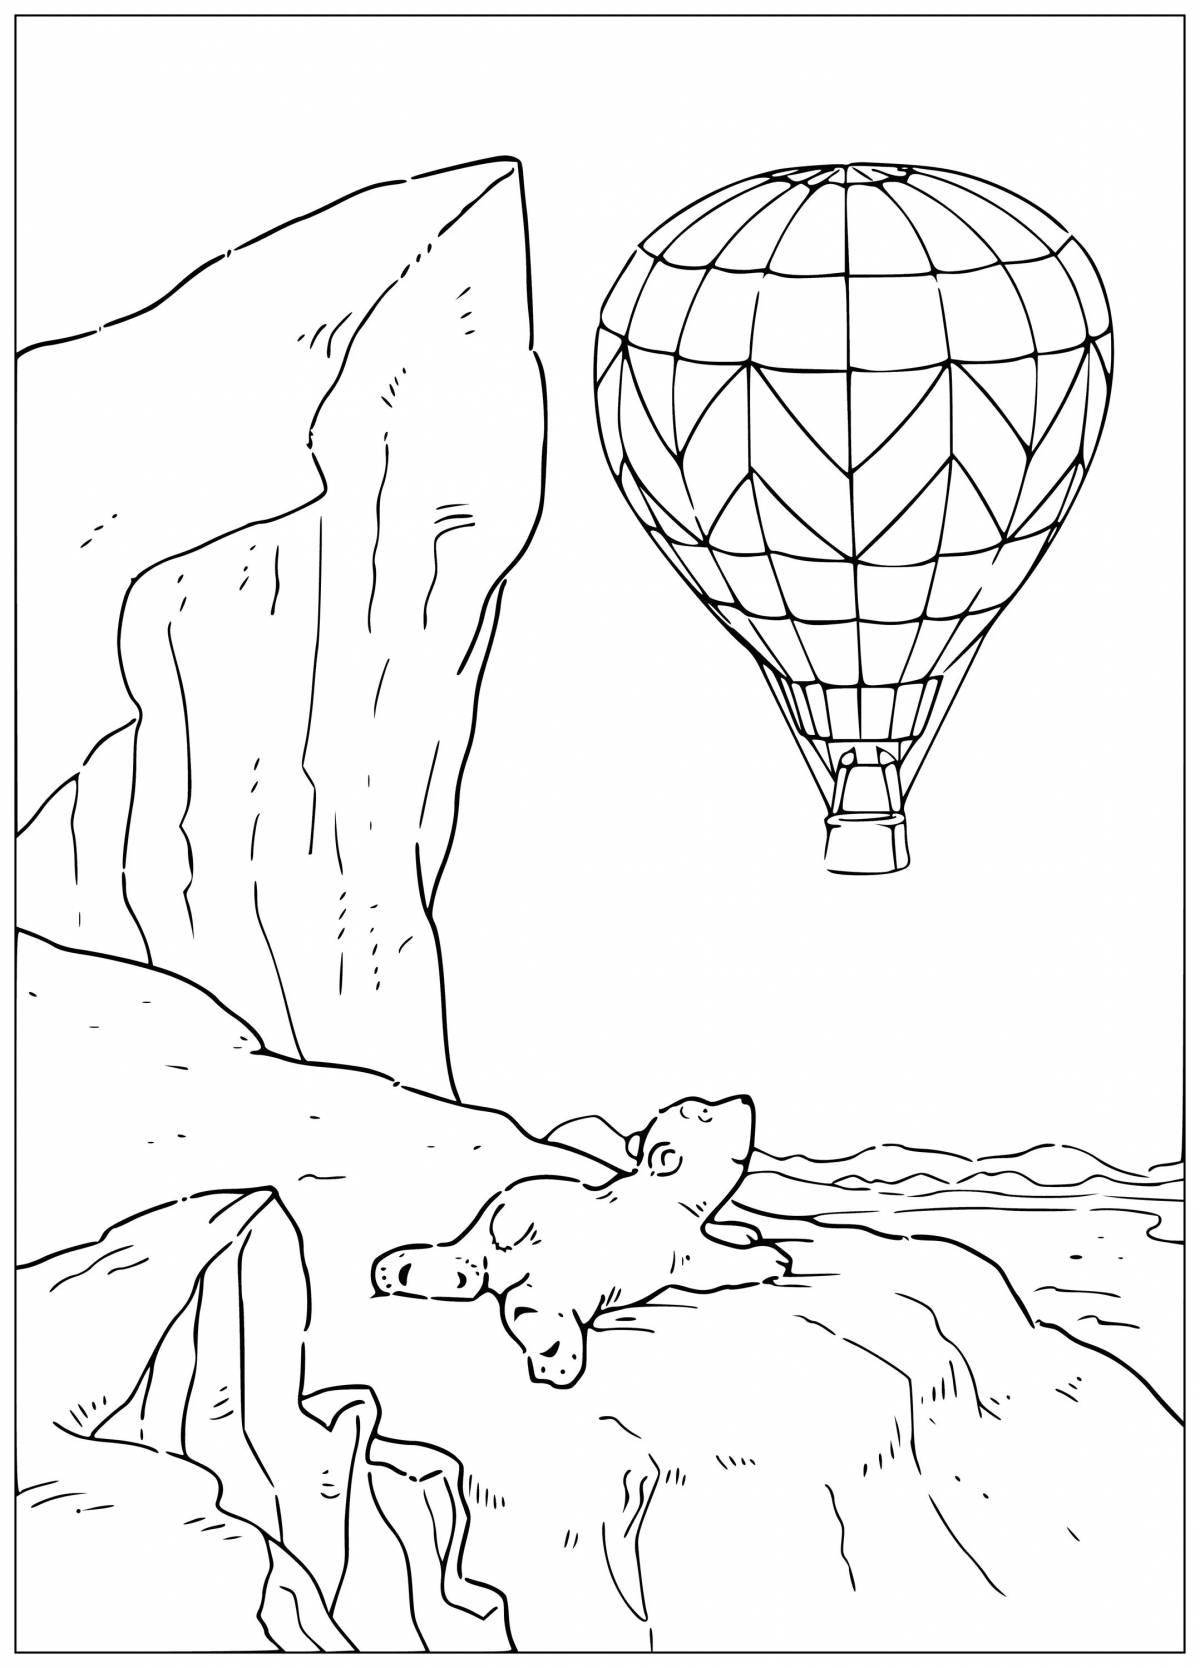 Great trip coloring book for kids